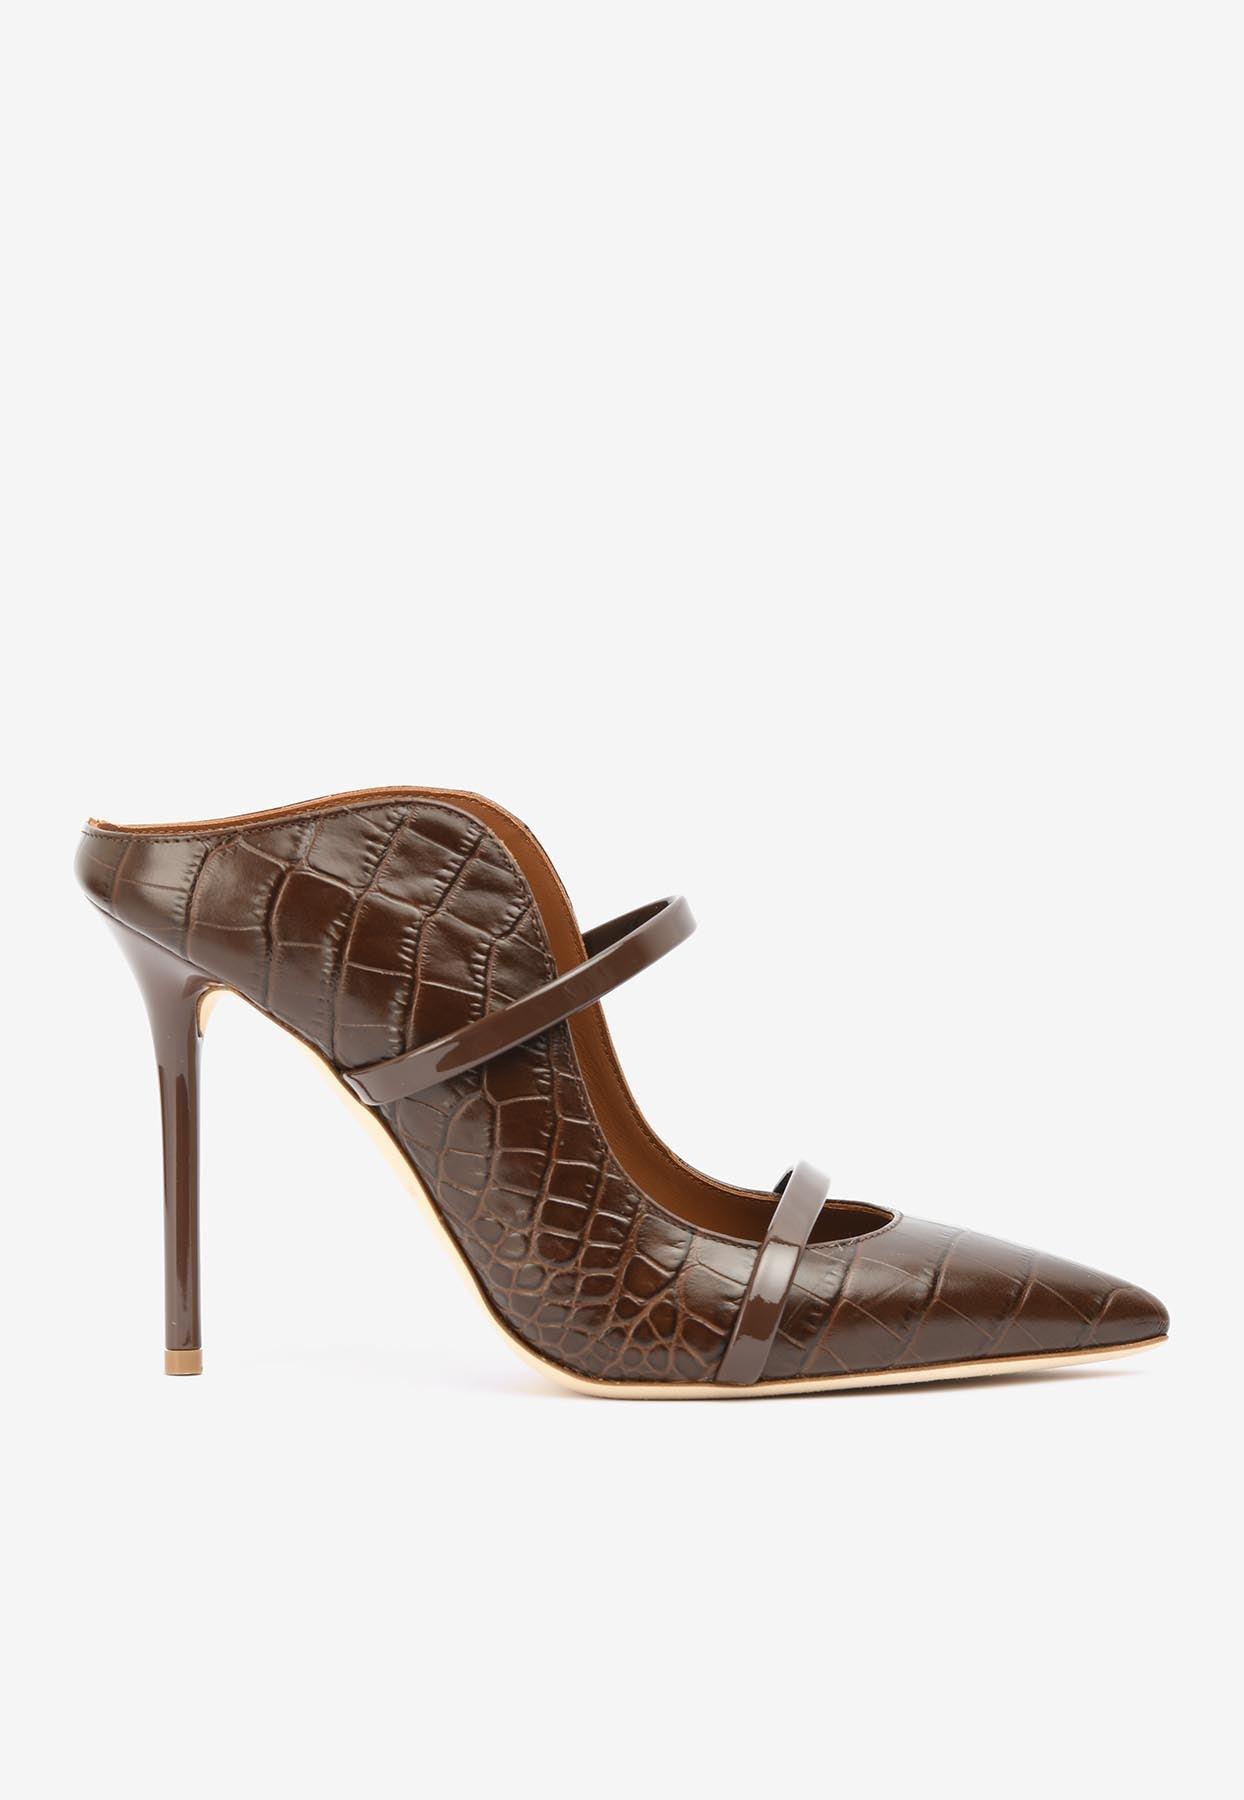 Malone Souliers Maureen 100 Mules In Croc-embossed Leather in Brown | Lyst